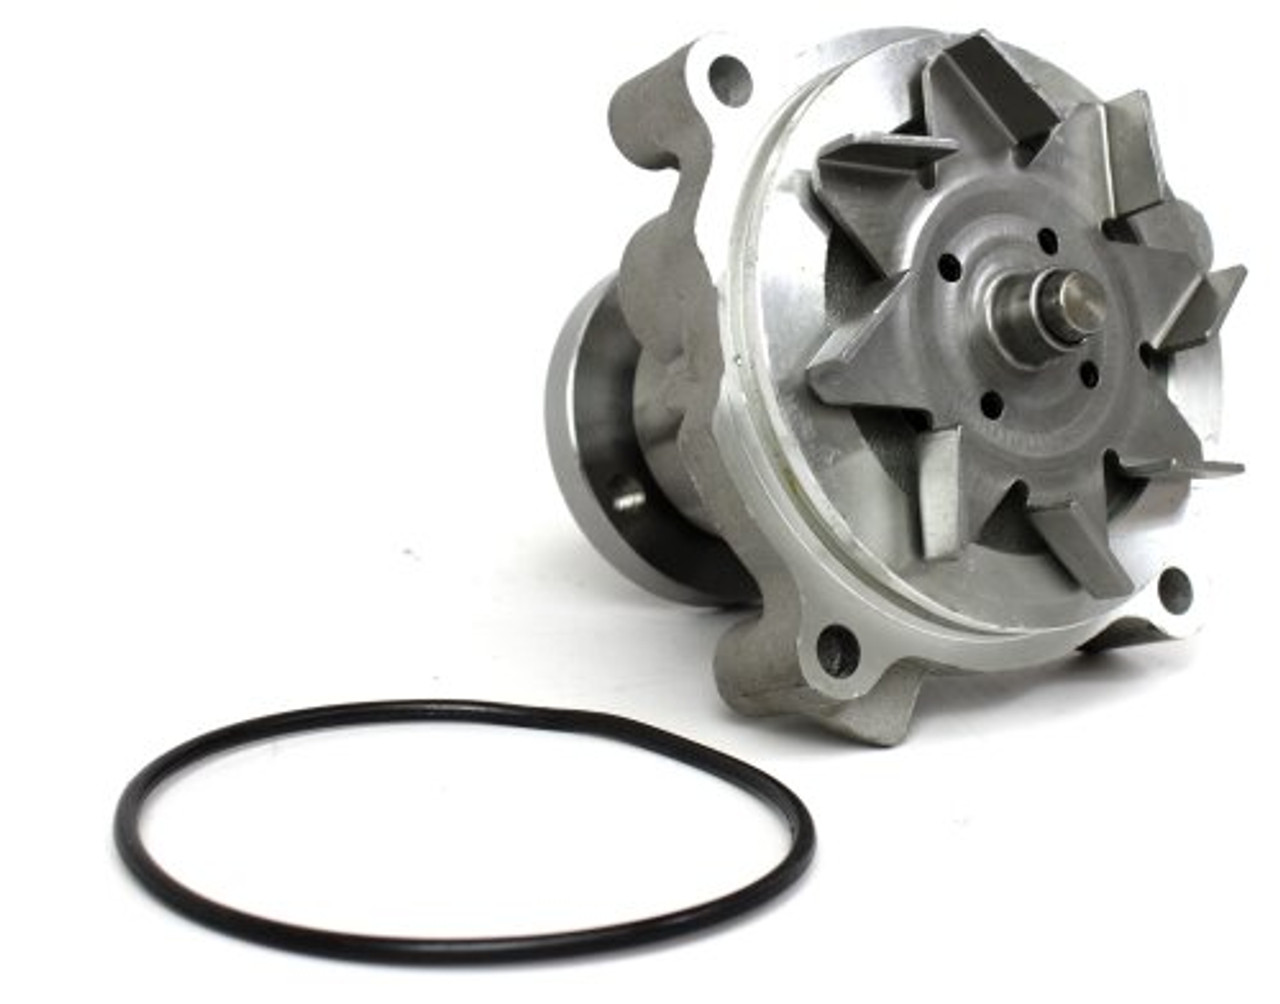 Water Pump - 2010 Ford E-250 4.6L Engine Parts # WP4170ZE34